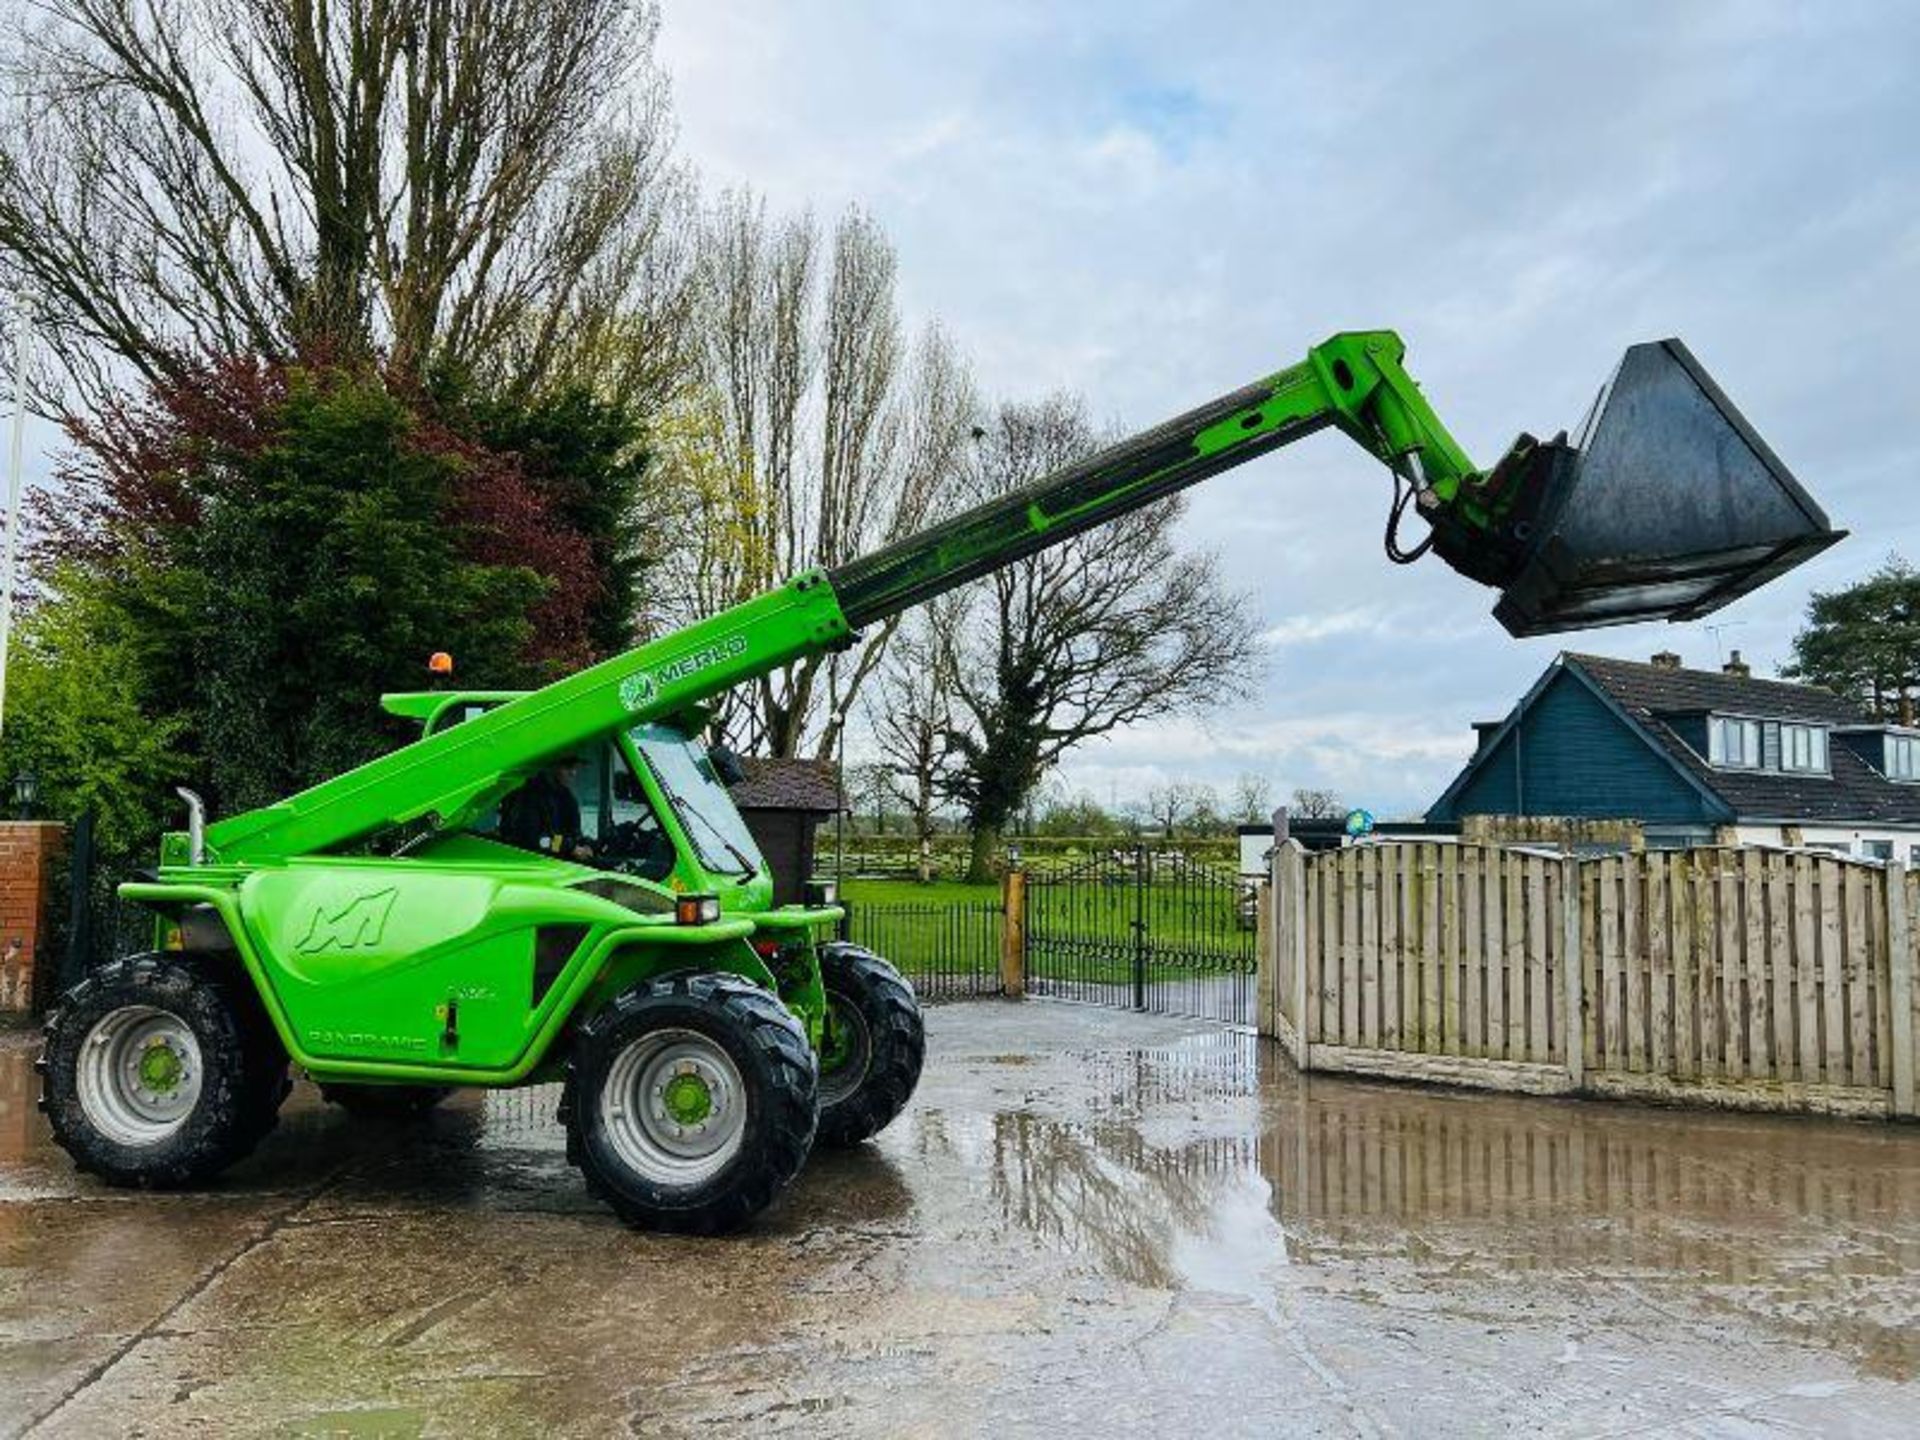 MERLO P34.7 4WD TELEHANDLER*YEAR 2013, AG SPEC* C/W PICK UP HITCH - Image 12 of 20